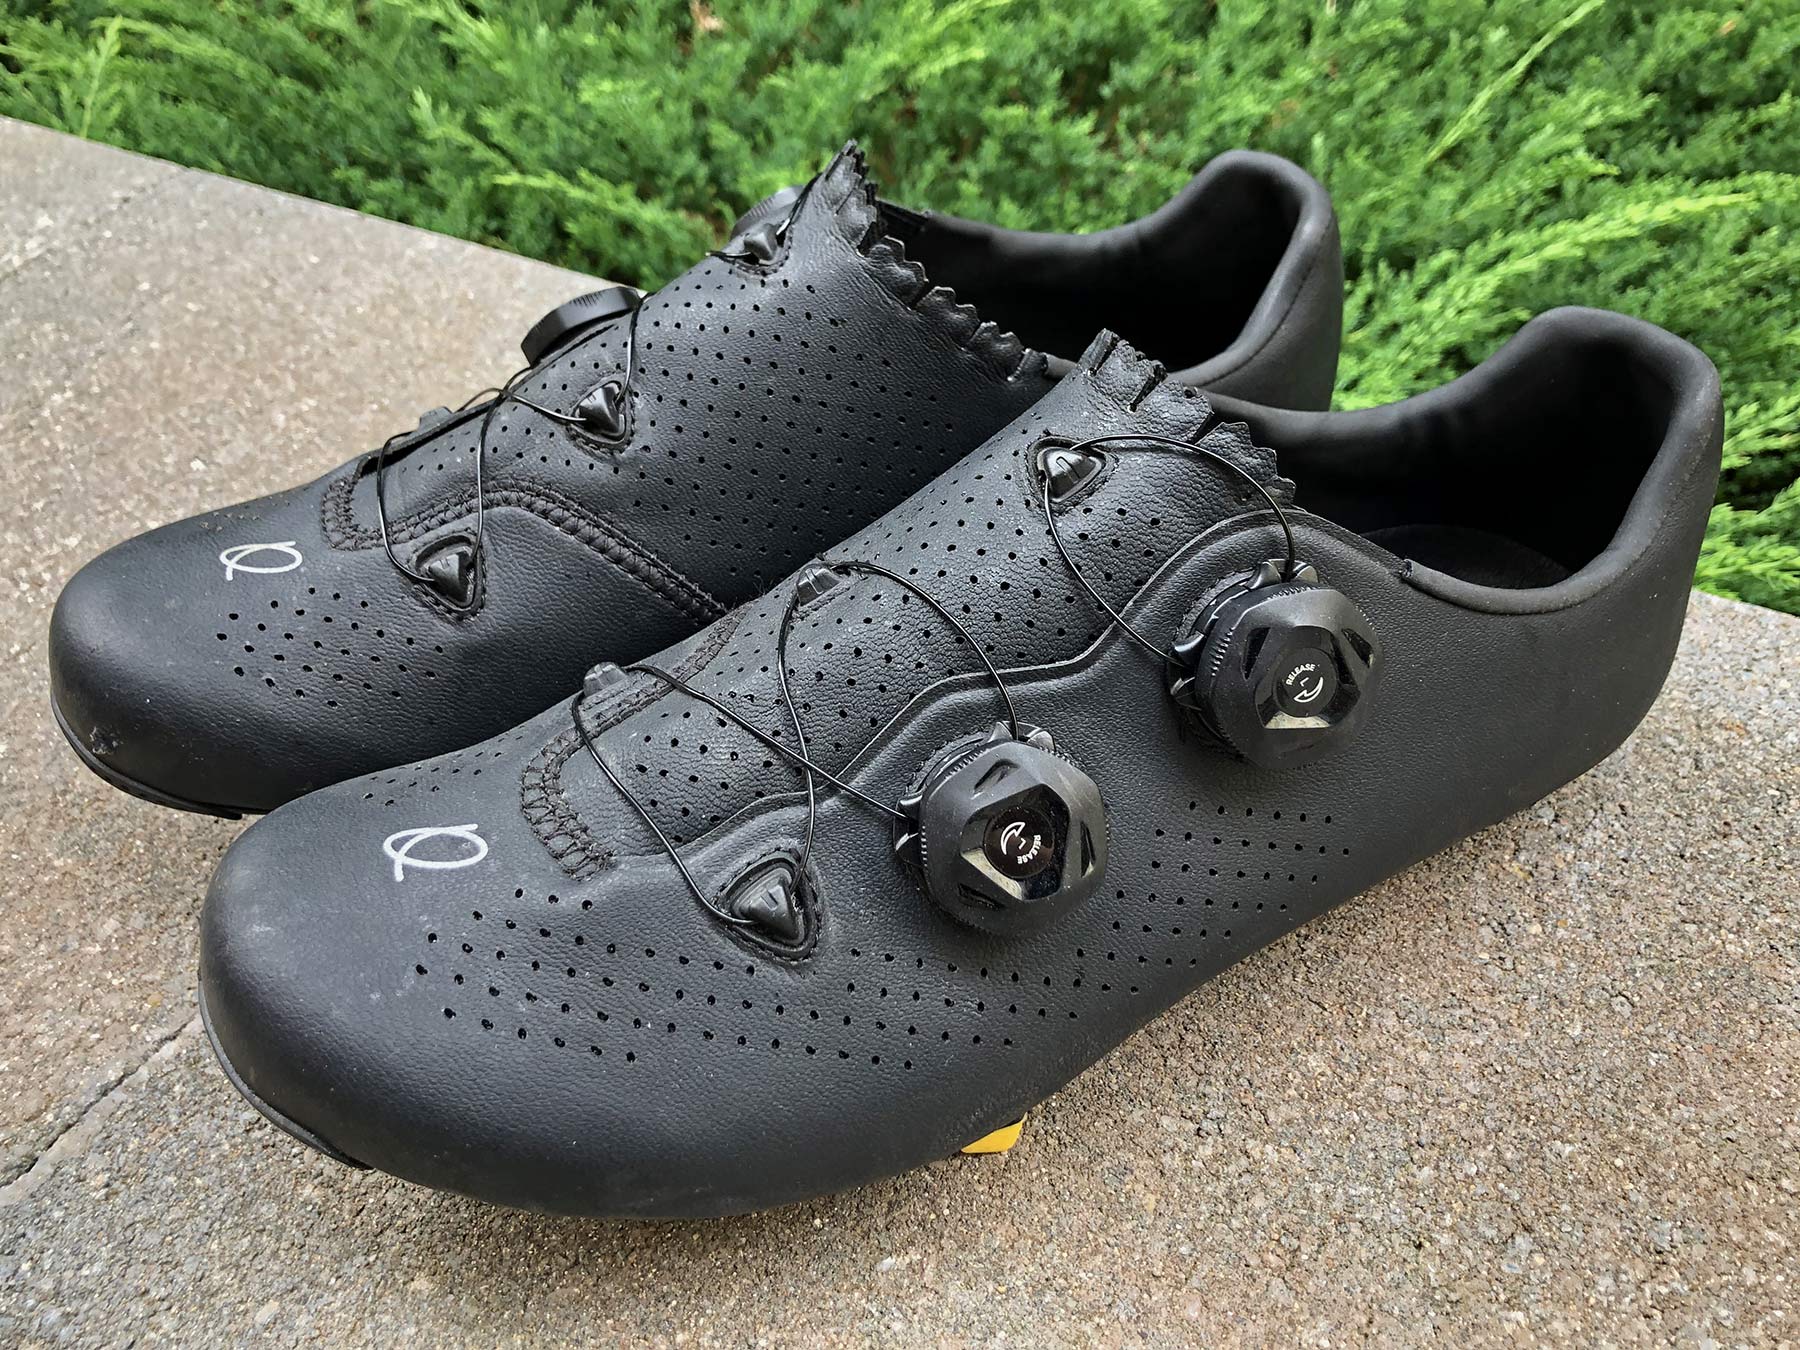 Quoc Mono II road bike shoes, lightweight carbon-soled road cycling shoes, pair